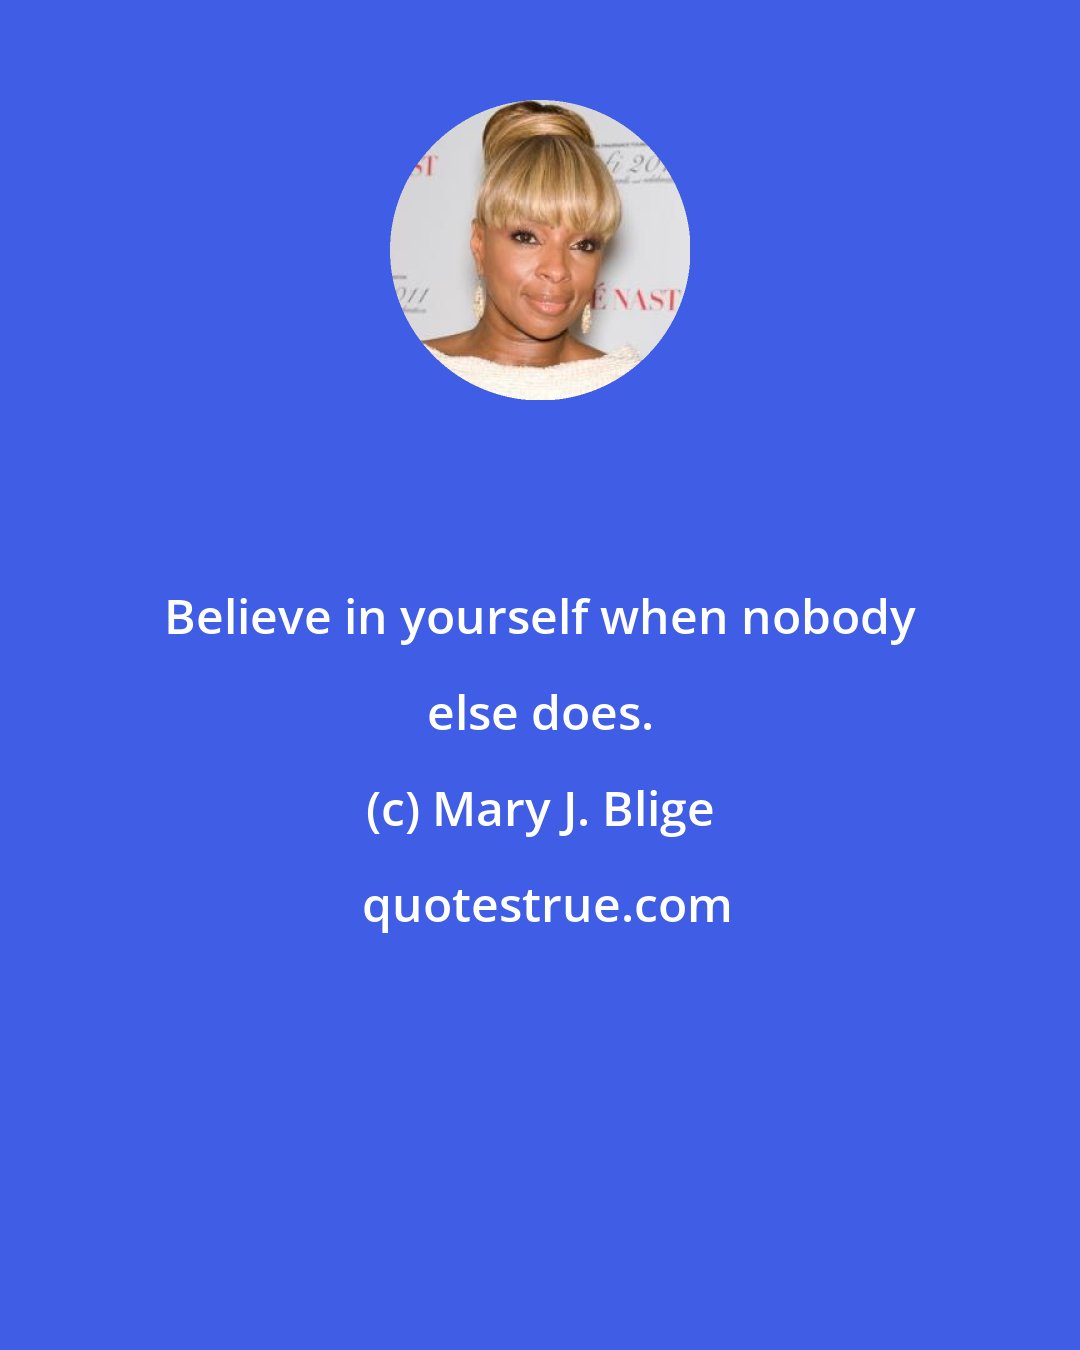 Mary J. Blige: Believe in yourself when nobody else does.